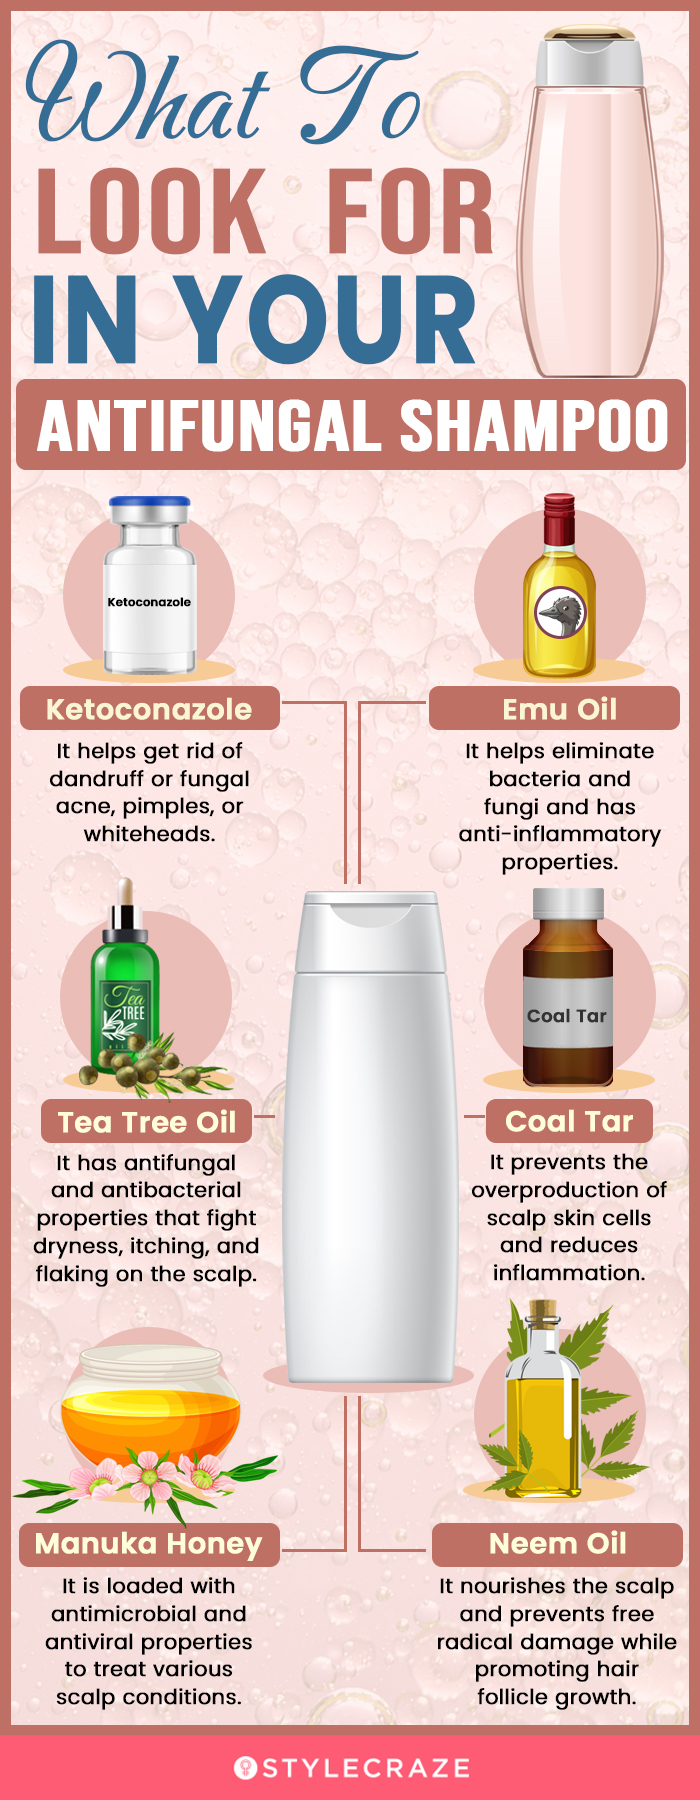 What To Look For In An Antifungal Shampoo (infographic)